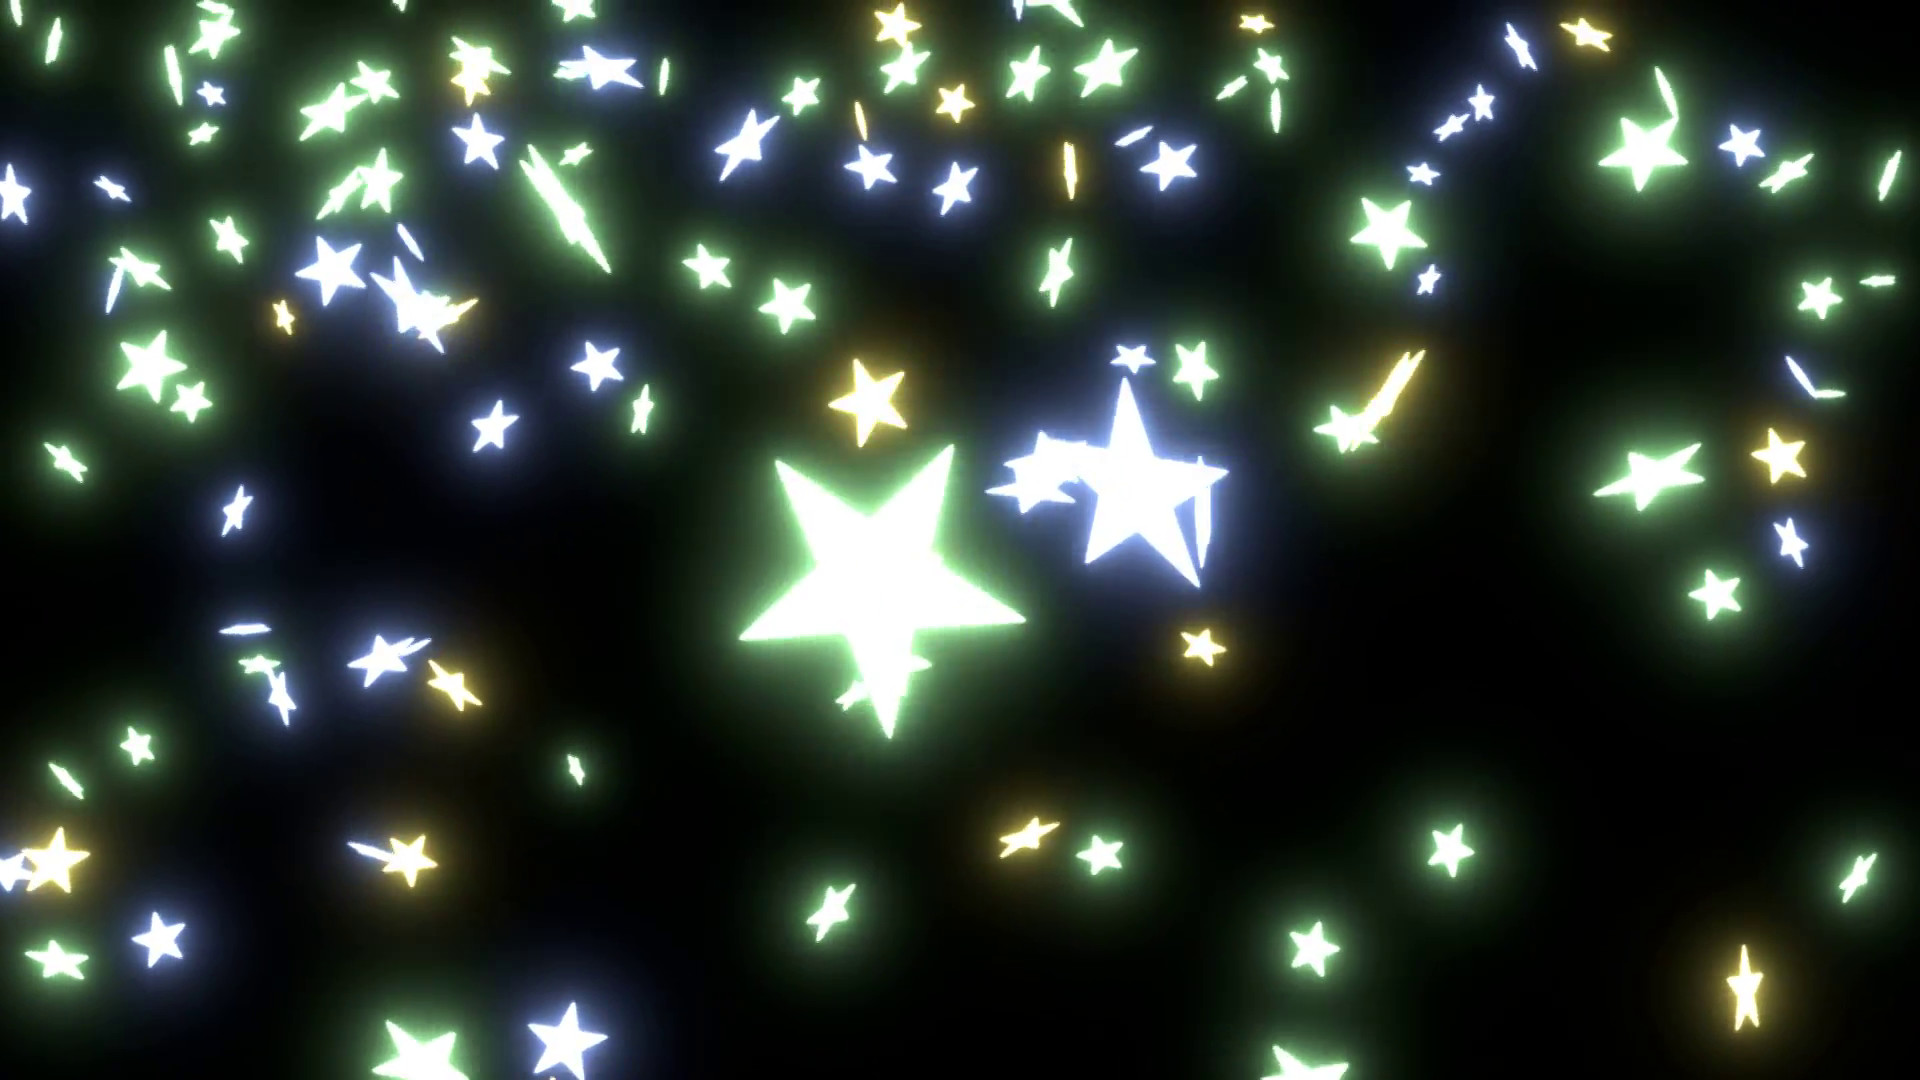 1920x1080 Subscription Library Animated falling stars on black background. Most stars  are with glowing cold colors (light